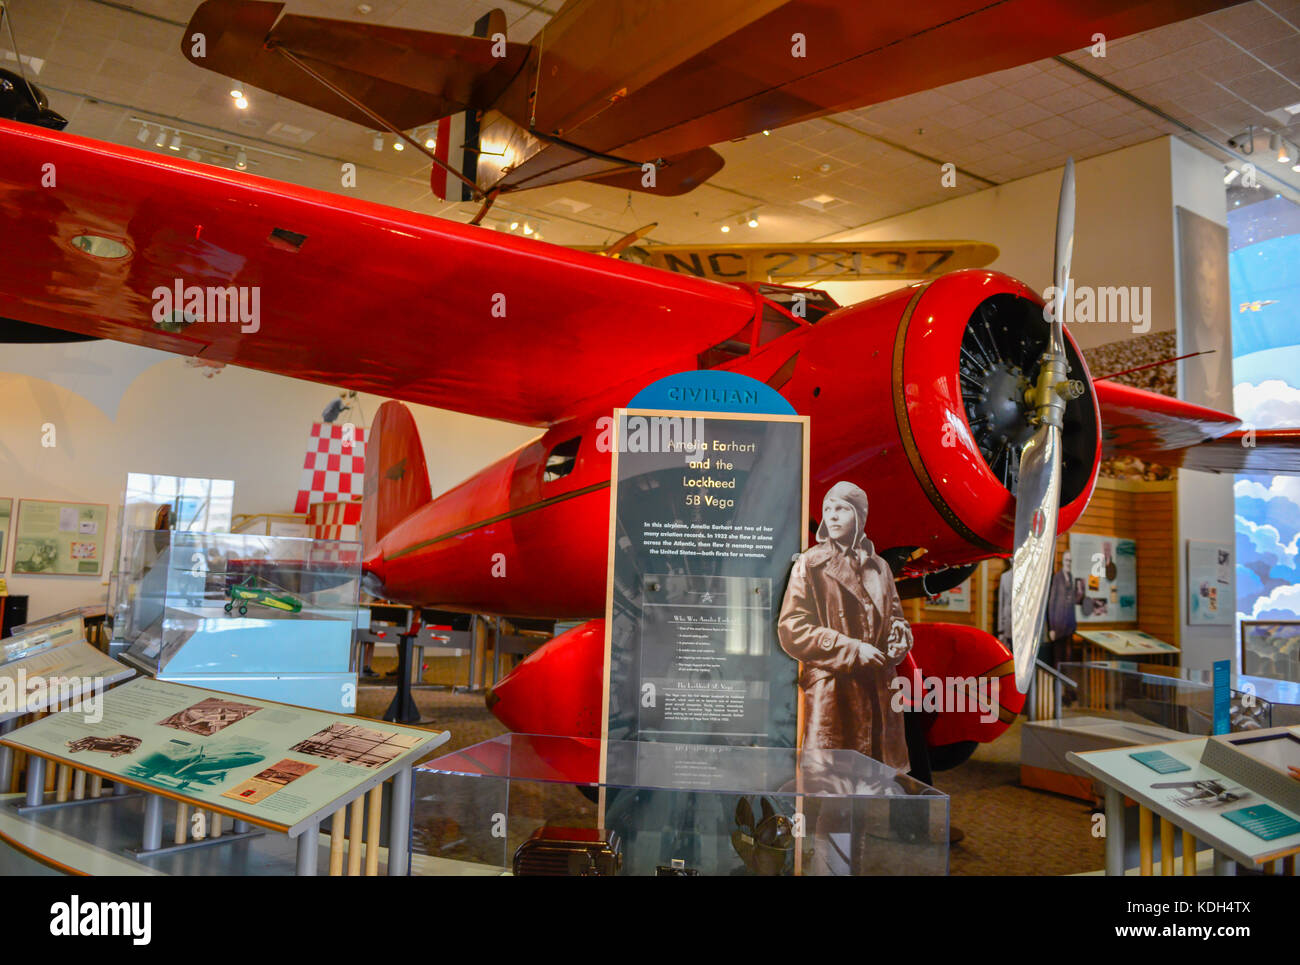 An exhibit of Amelia Earhart's plane, the Lockheed 5B Vega, with historical photo displays at the National Air and Space Museum in Washington, DC, USA Stock Photo